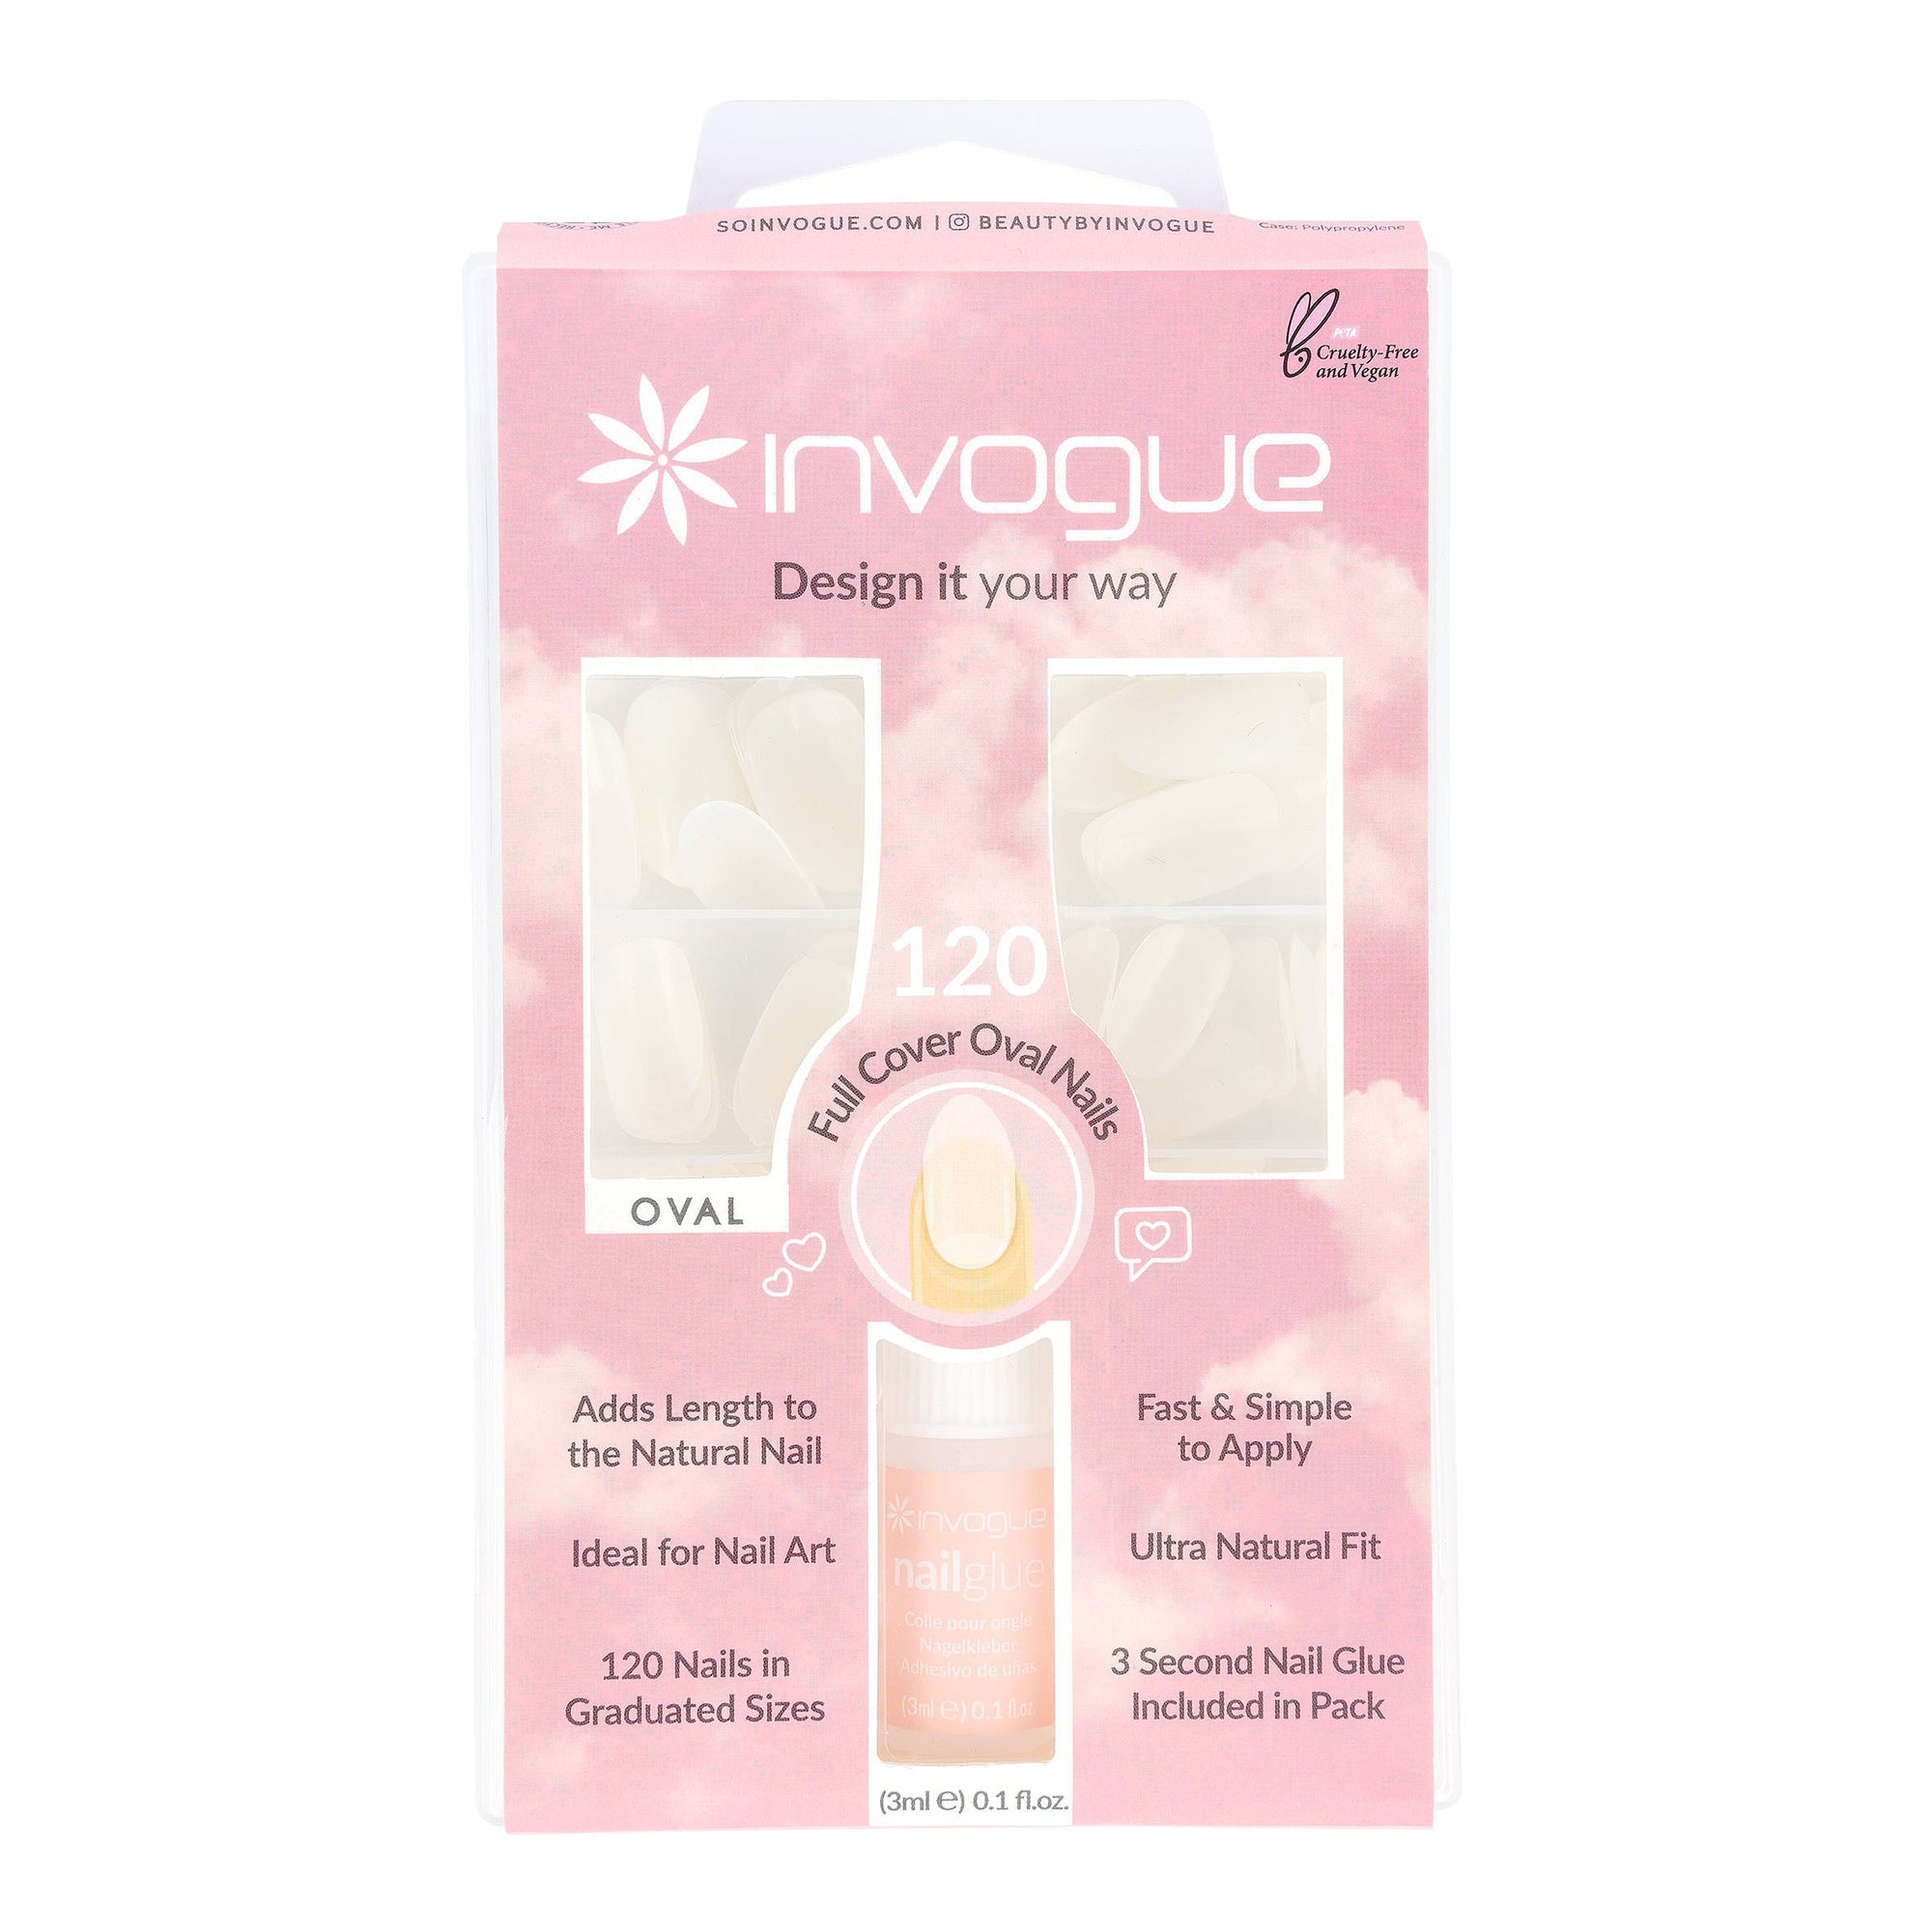 Invogue Full Cover Oval Nails 120stk